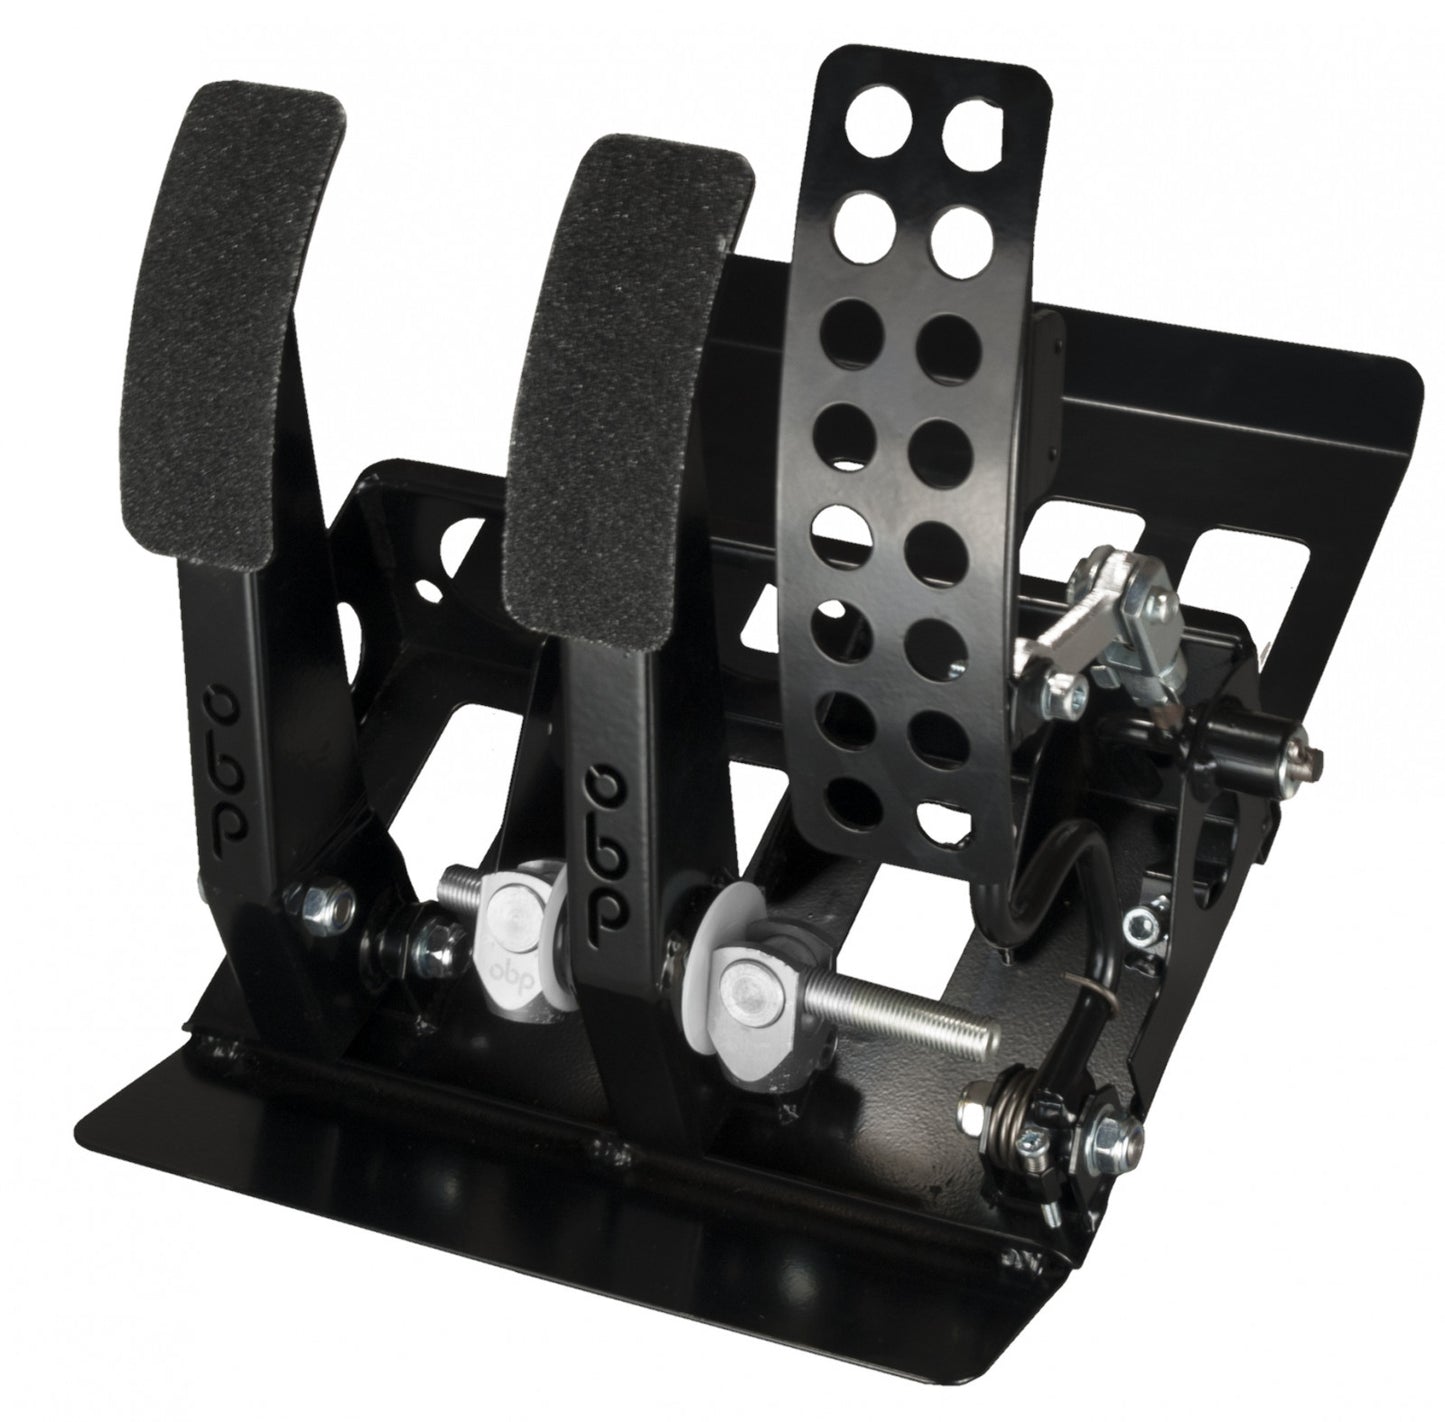 obp Motorsport Track-Pro Floor Mounted 3 Pedal System OBPXY002